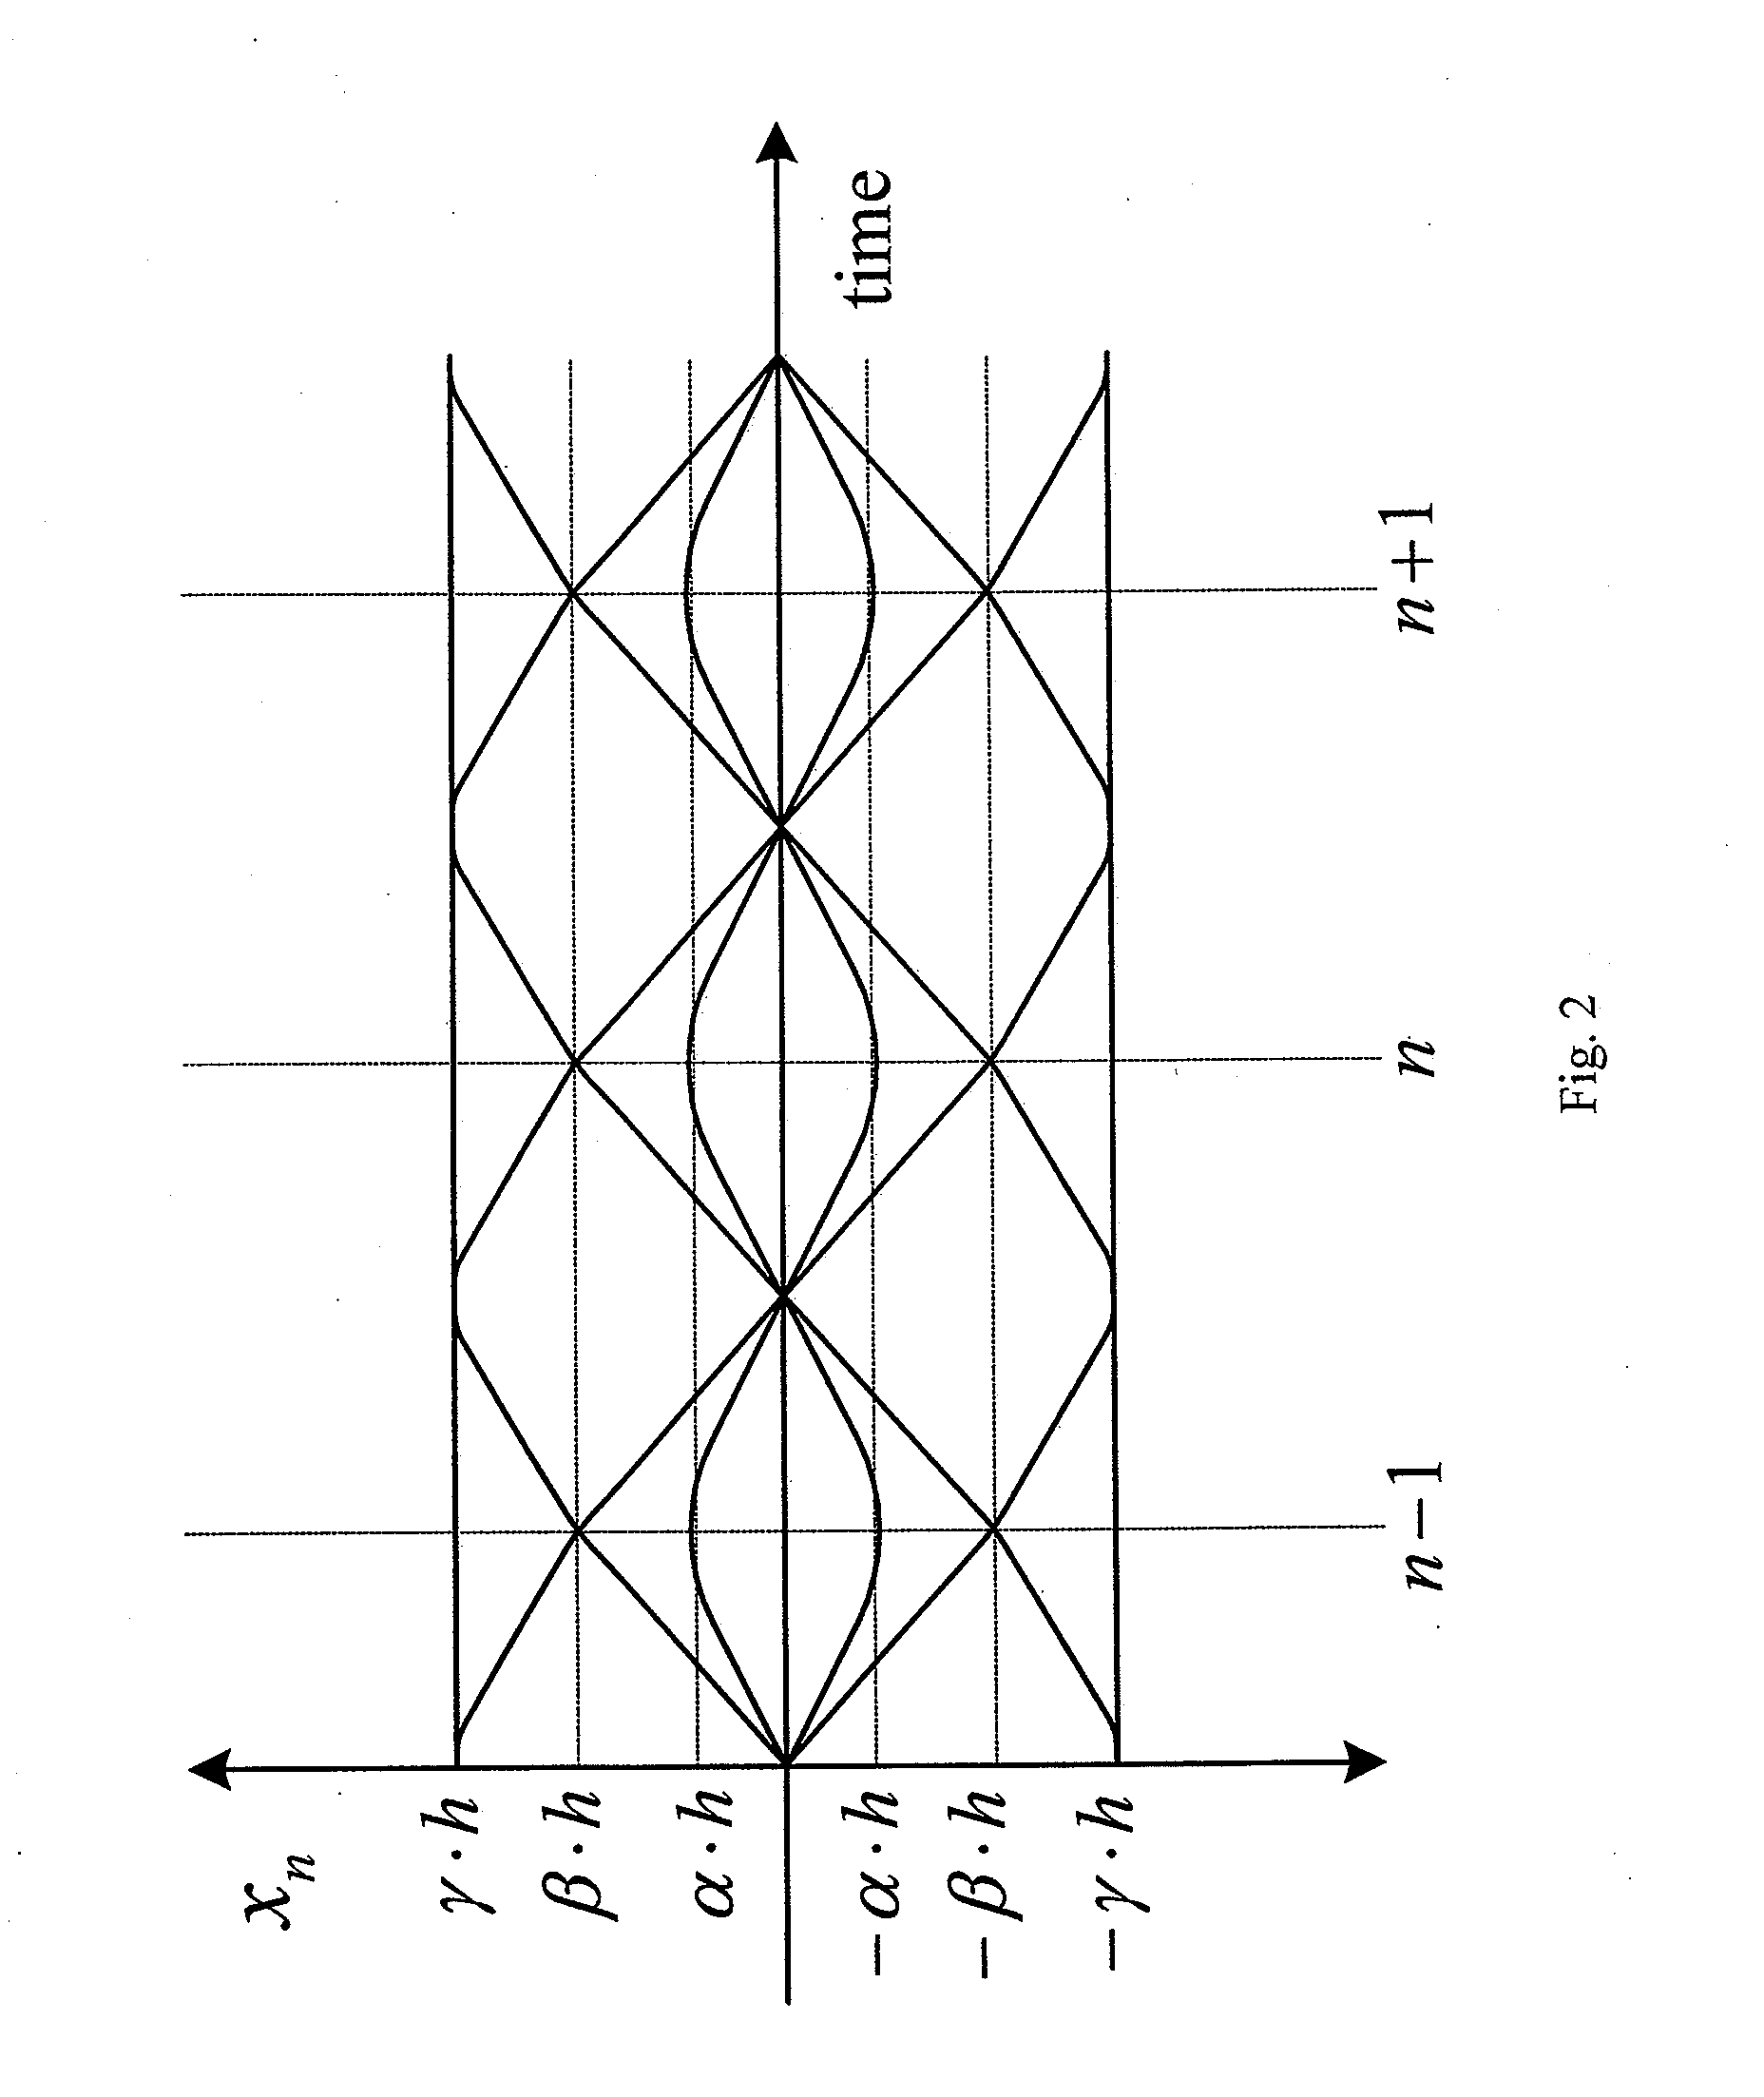 Apparatus and method for signal quality measurement on gfsk signals